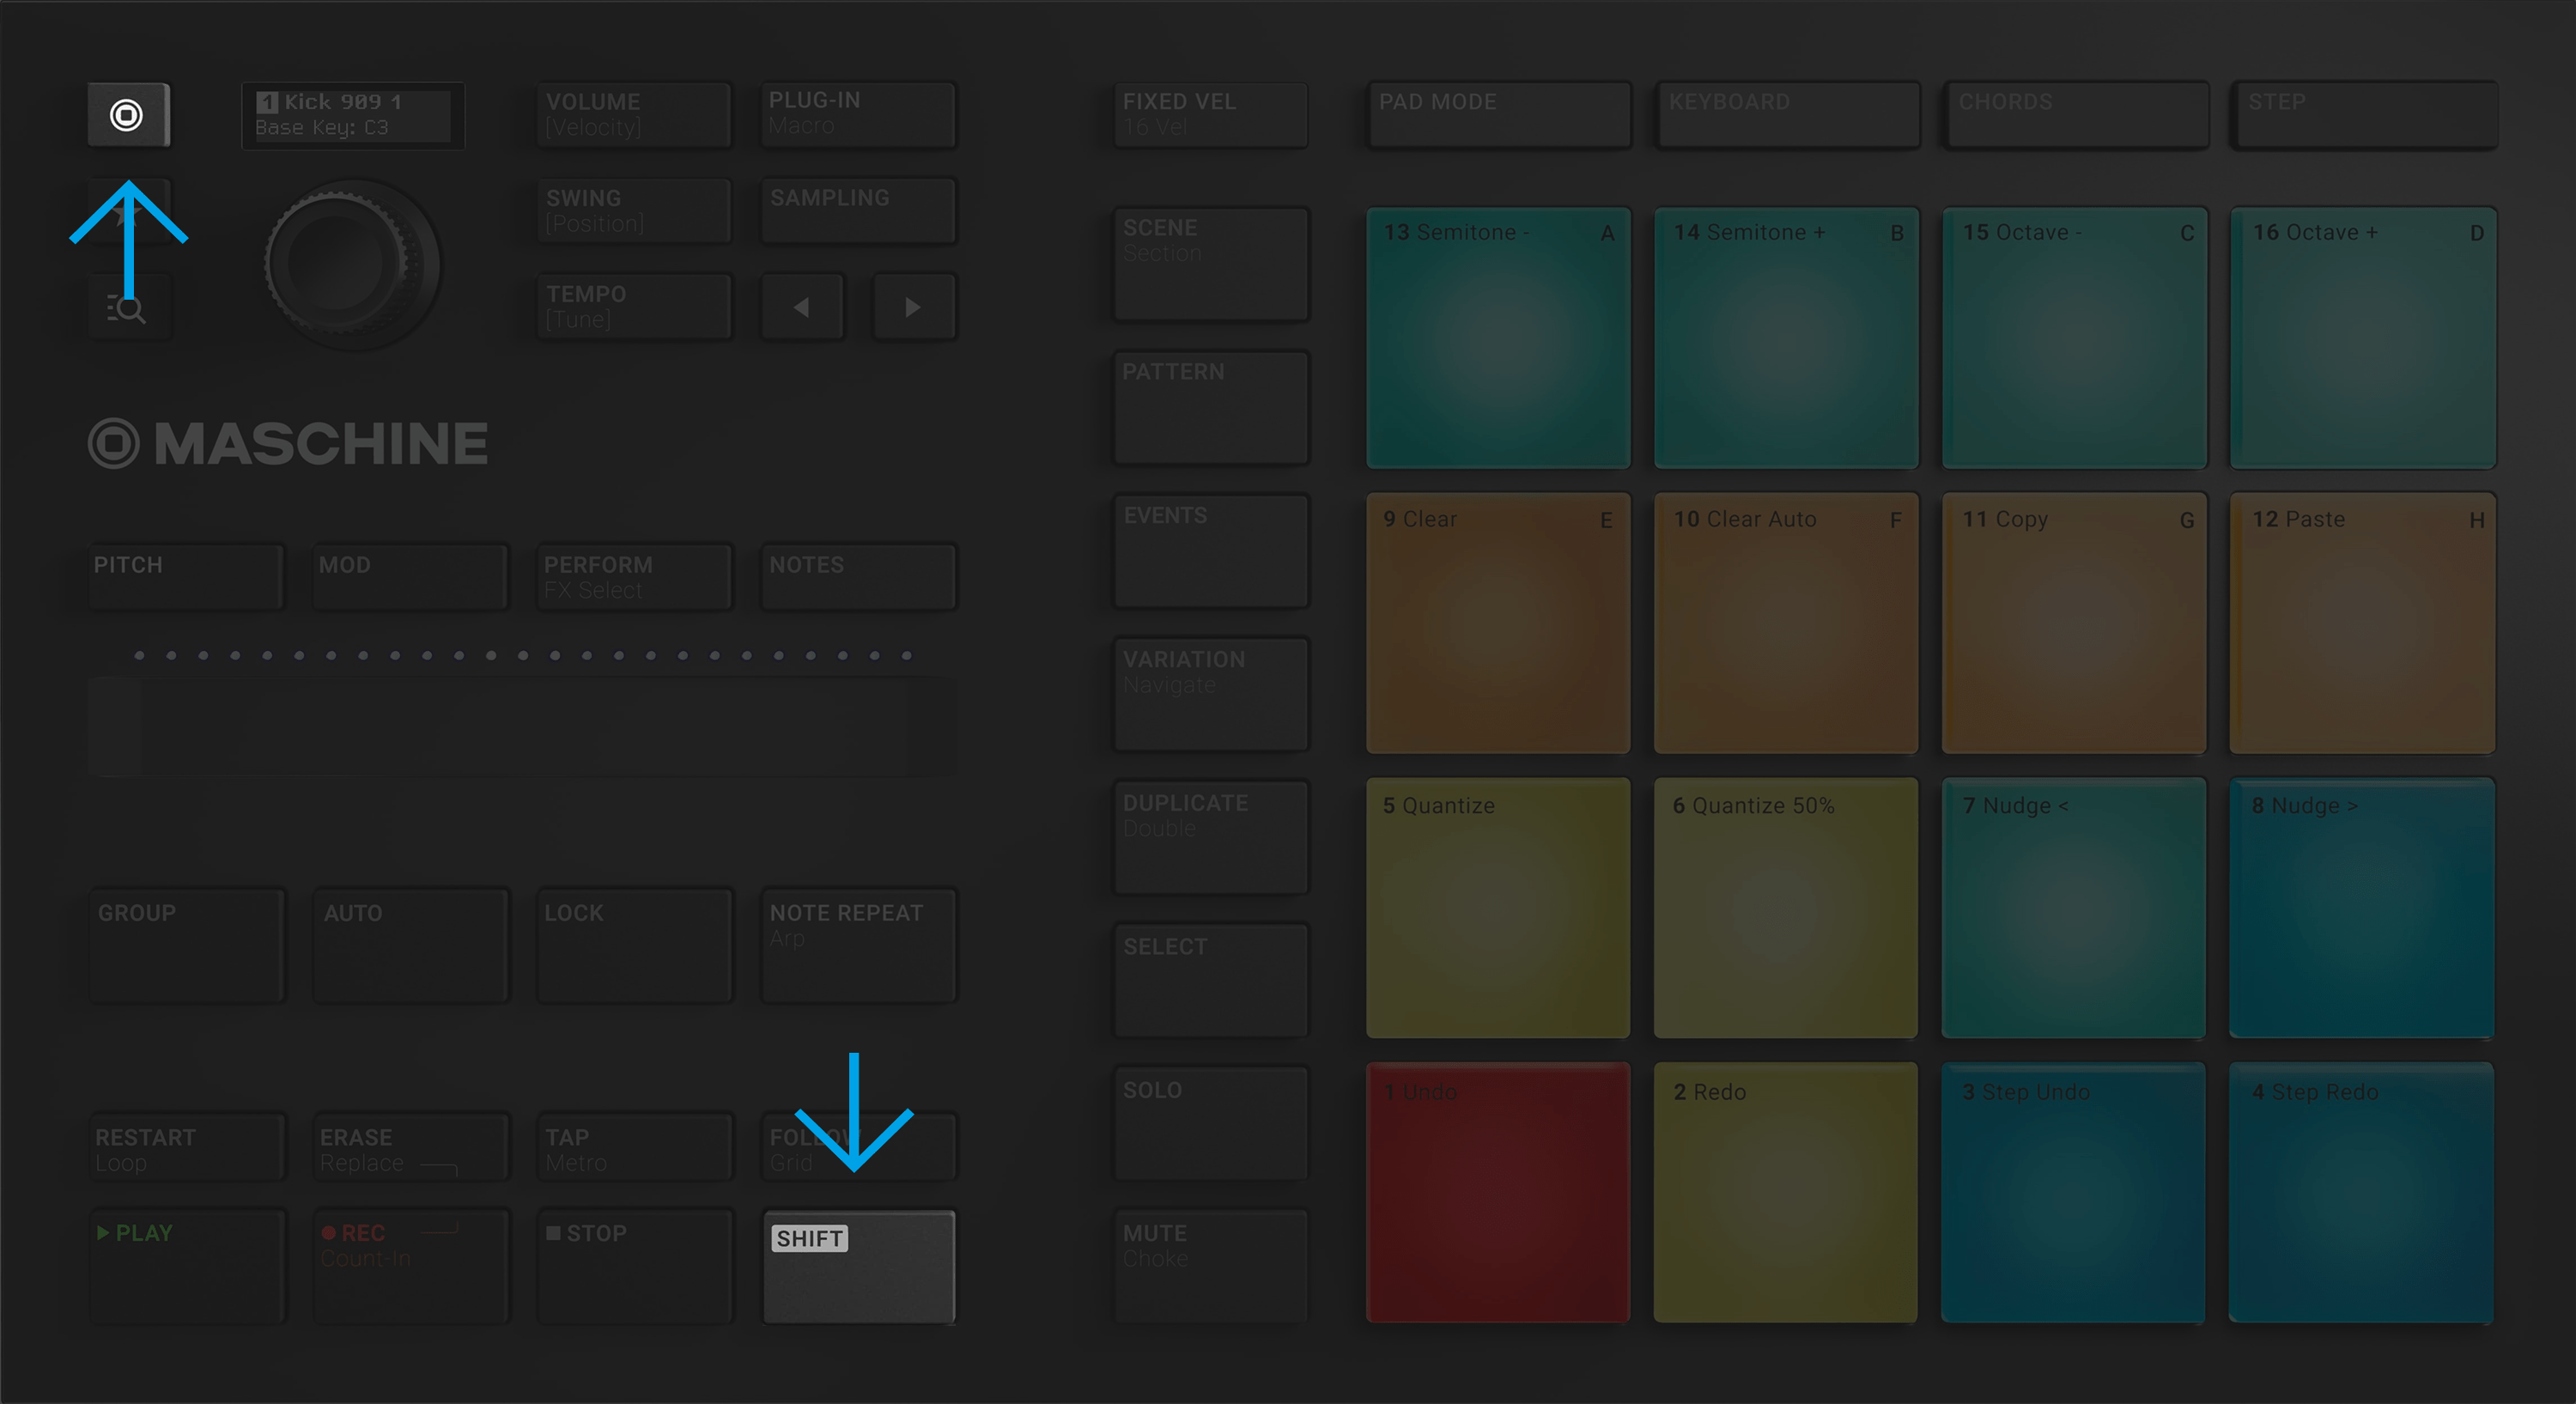 Press the SHIFT & MASCHINE buttons together